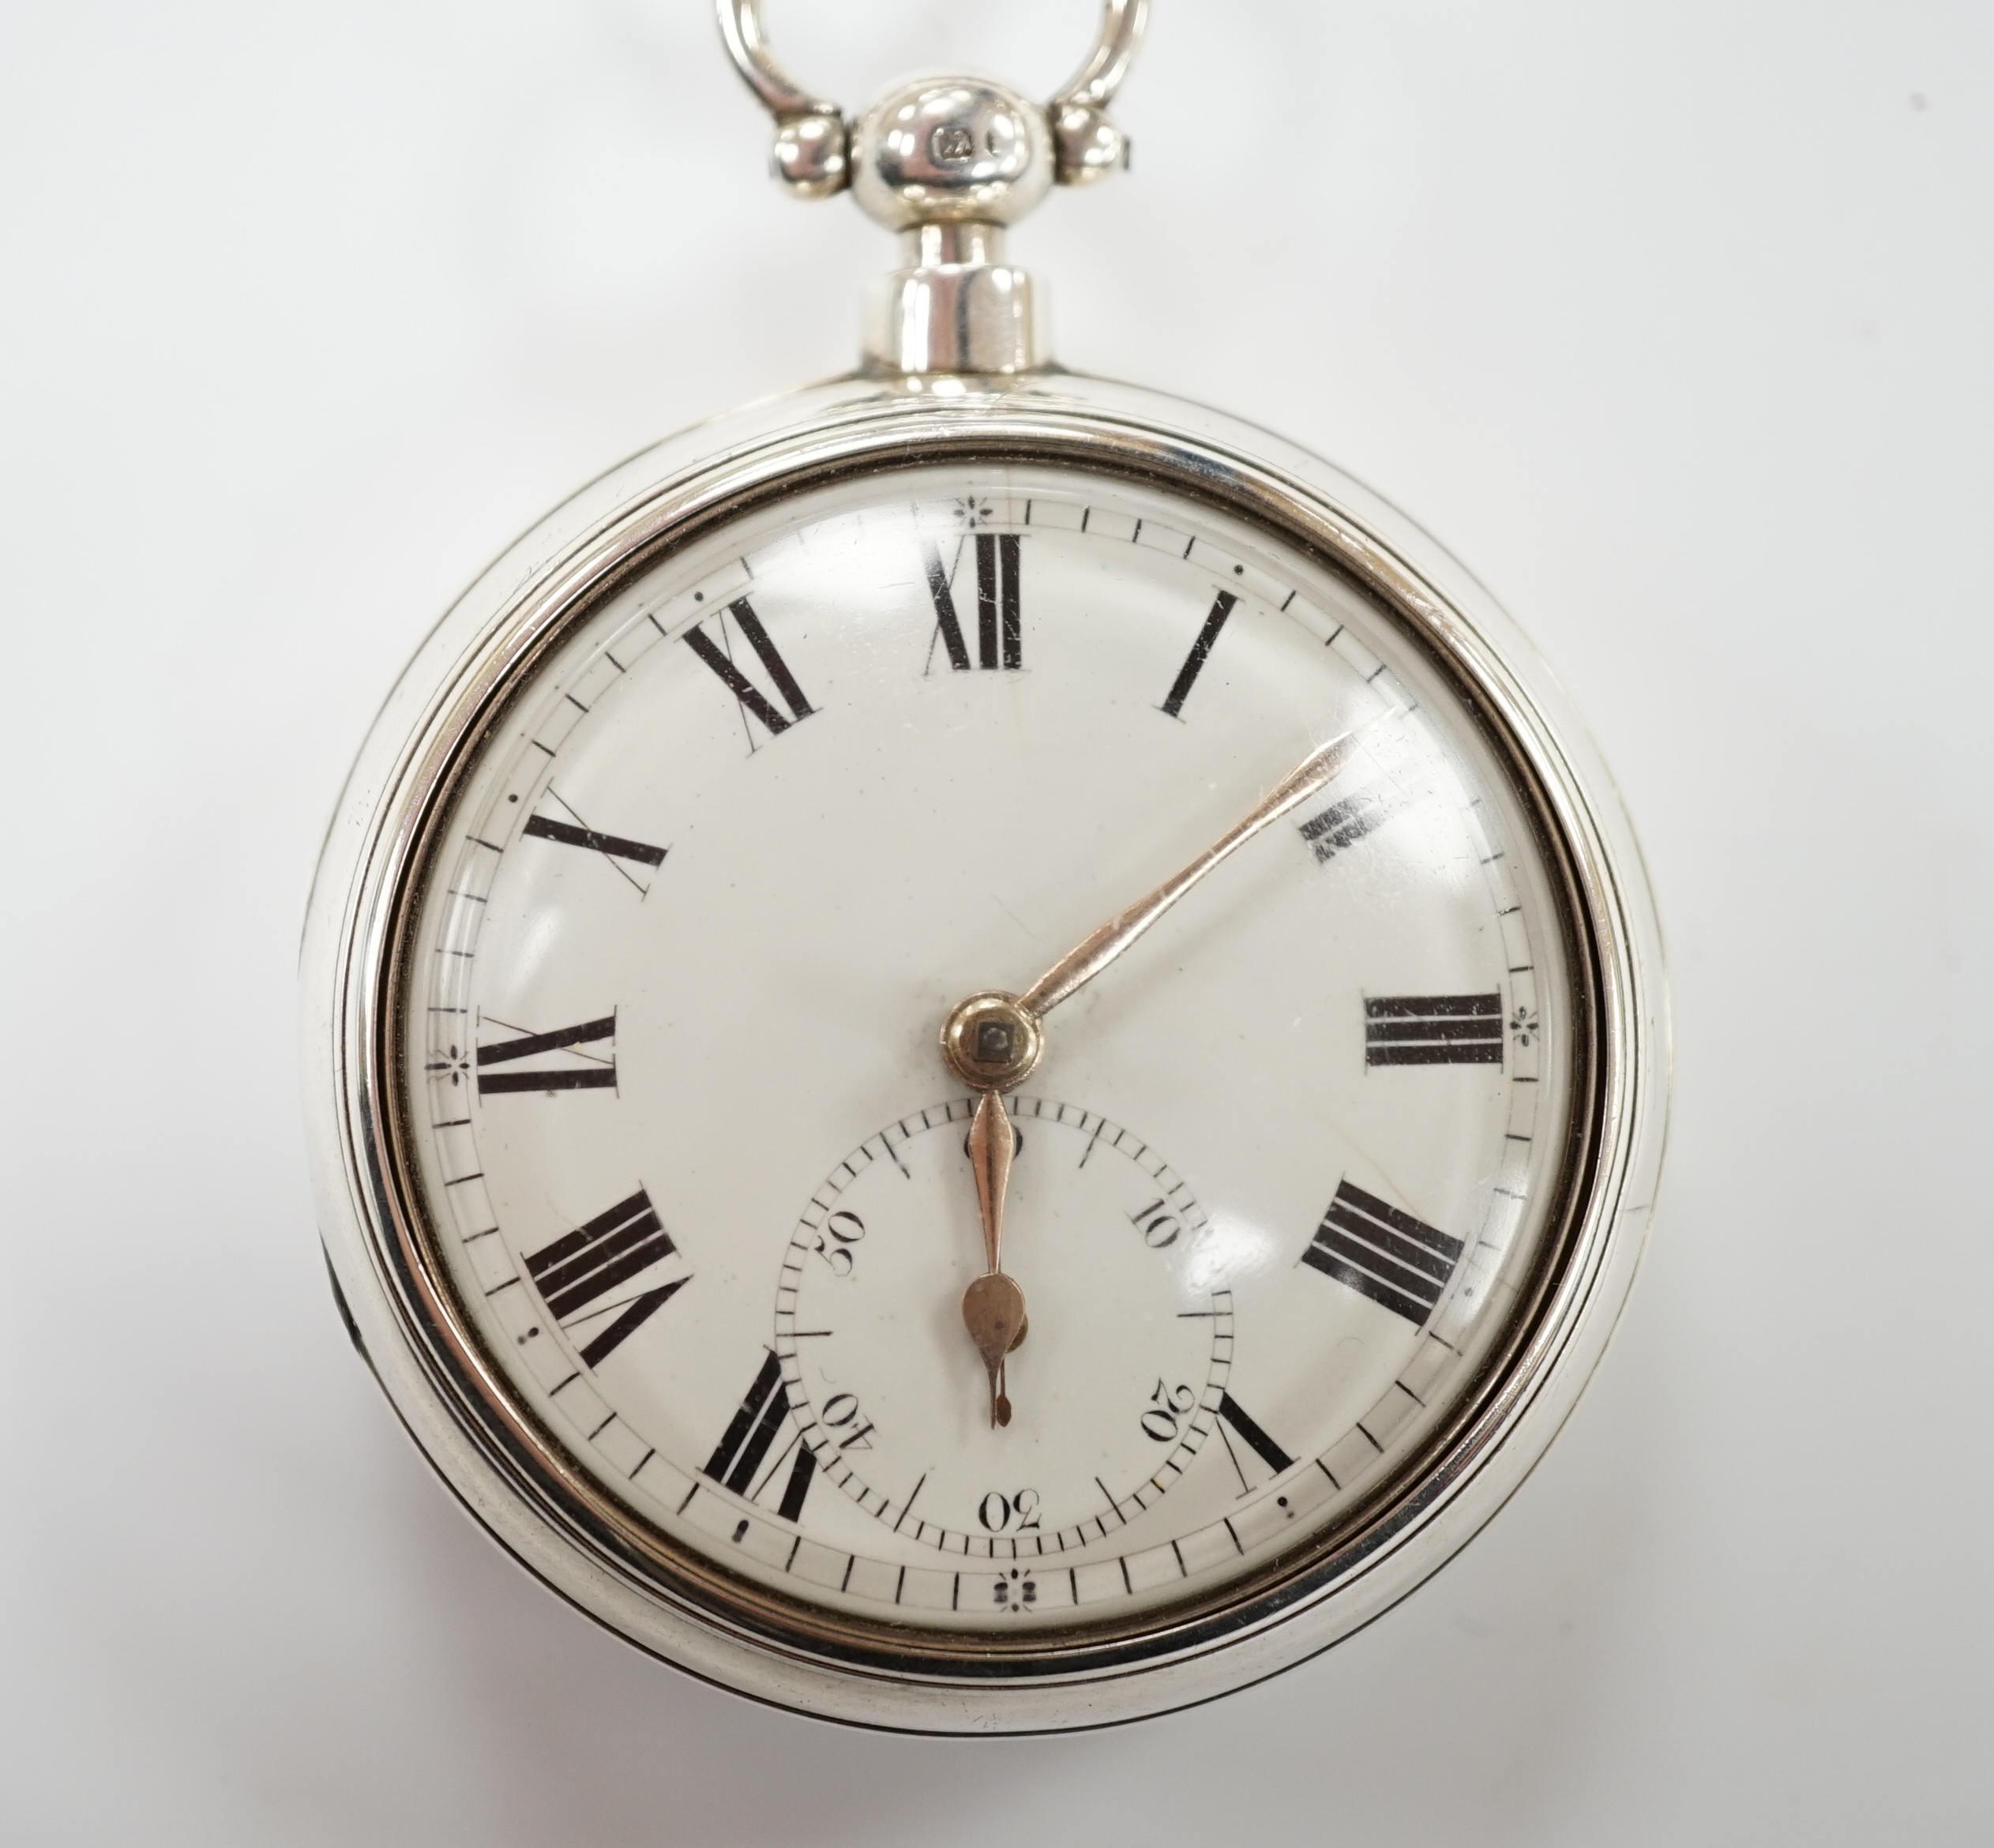 An early Victorian silver pair cased keywind pocket watch, by Curran of Dublin, with Roman dial